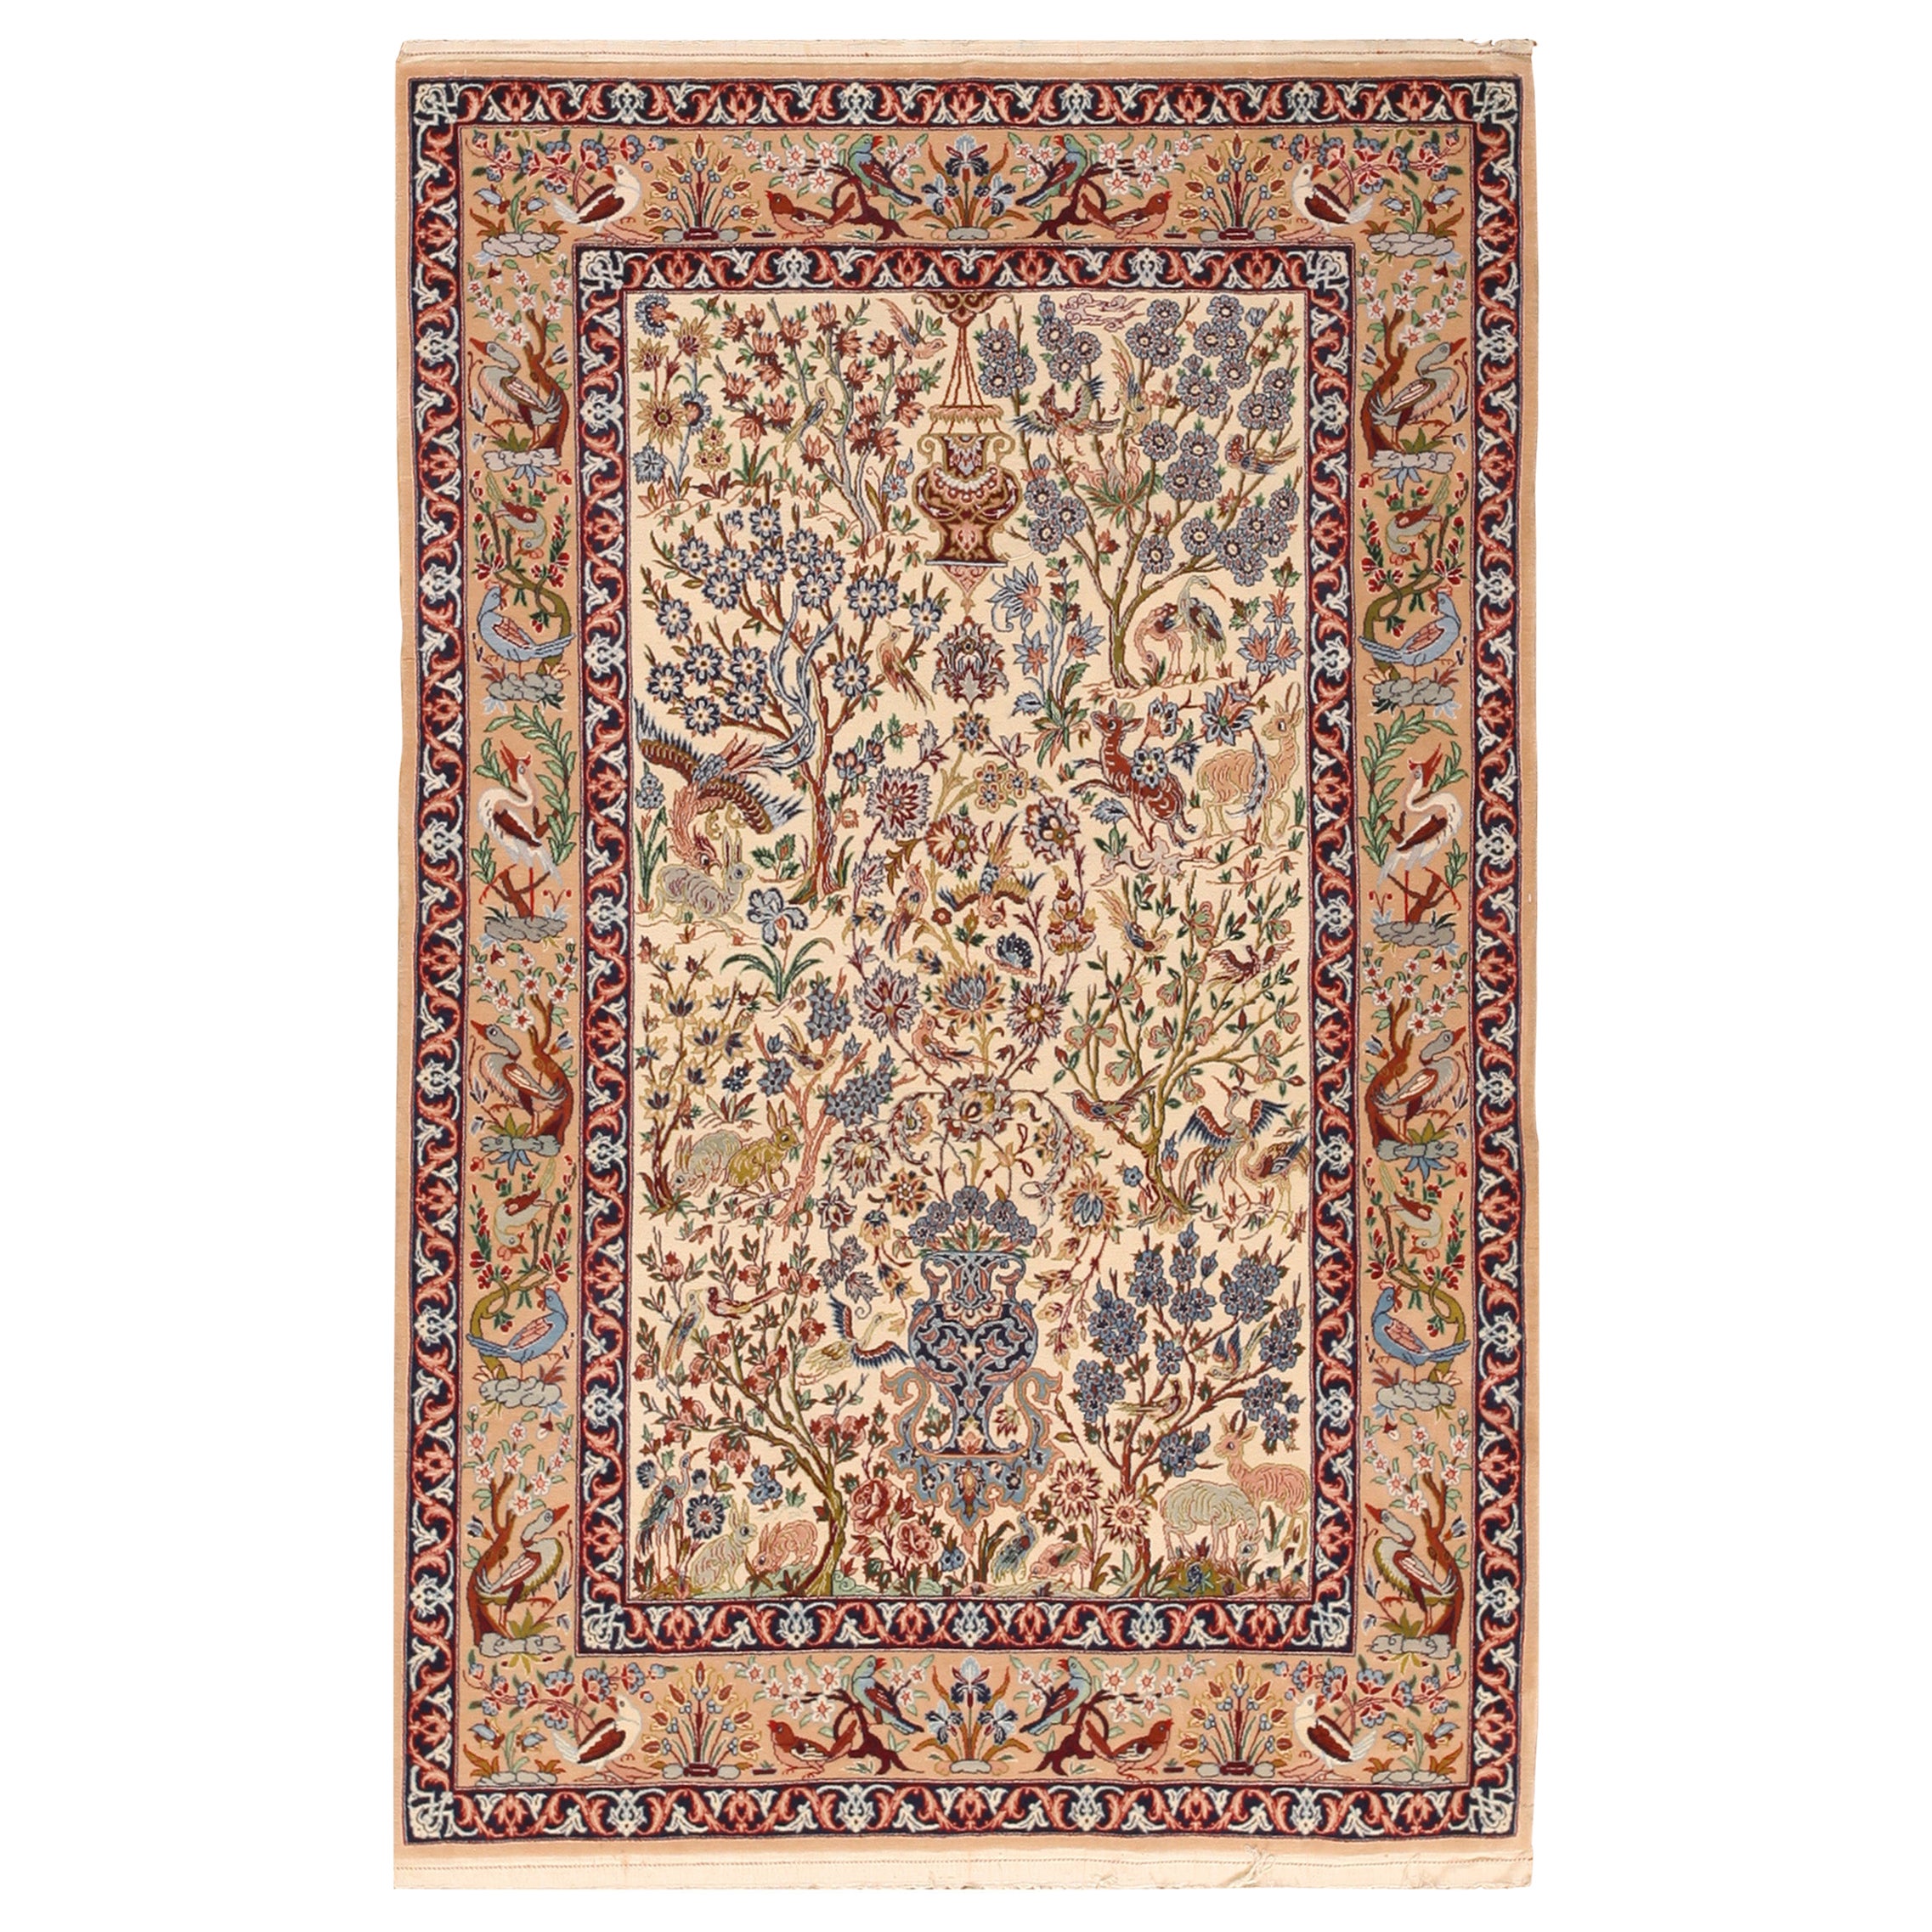 Mid 20th Century Persian Isfahan Carpet ( 3'7" x 5'5" - 110 x 165 cm ) For Sale